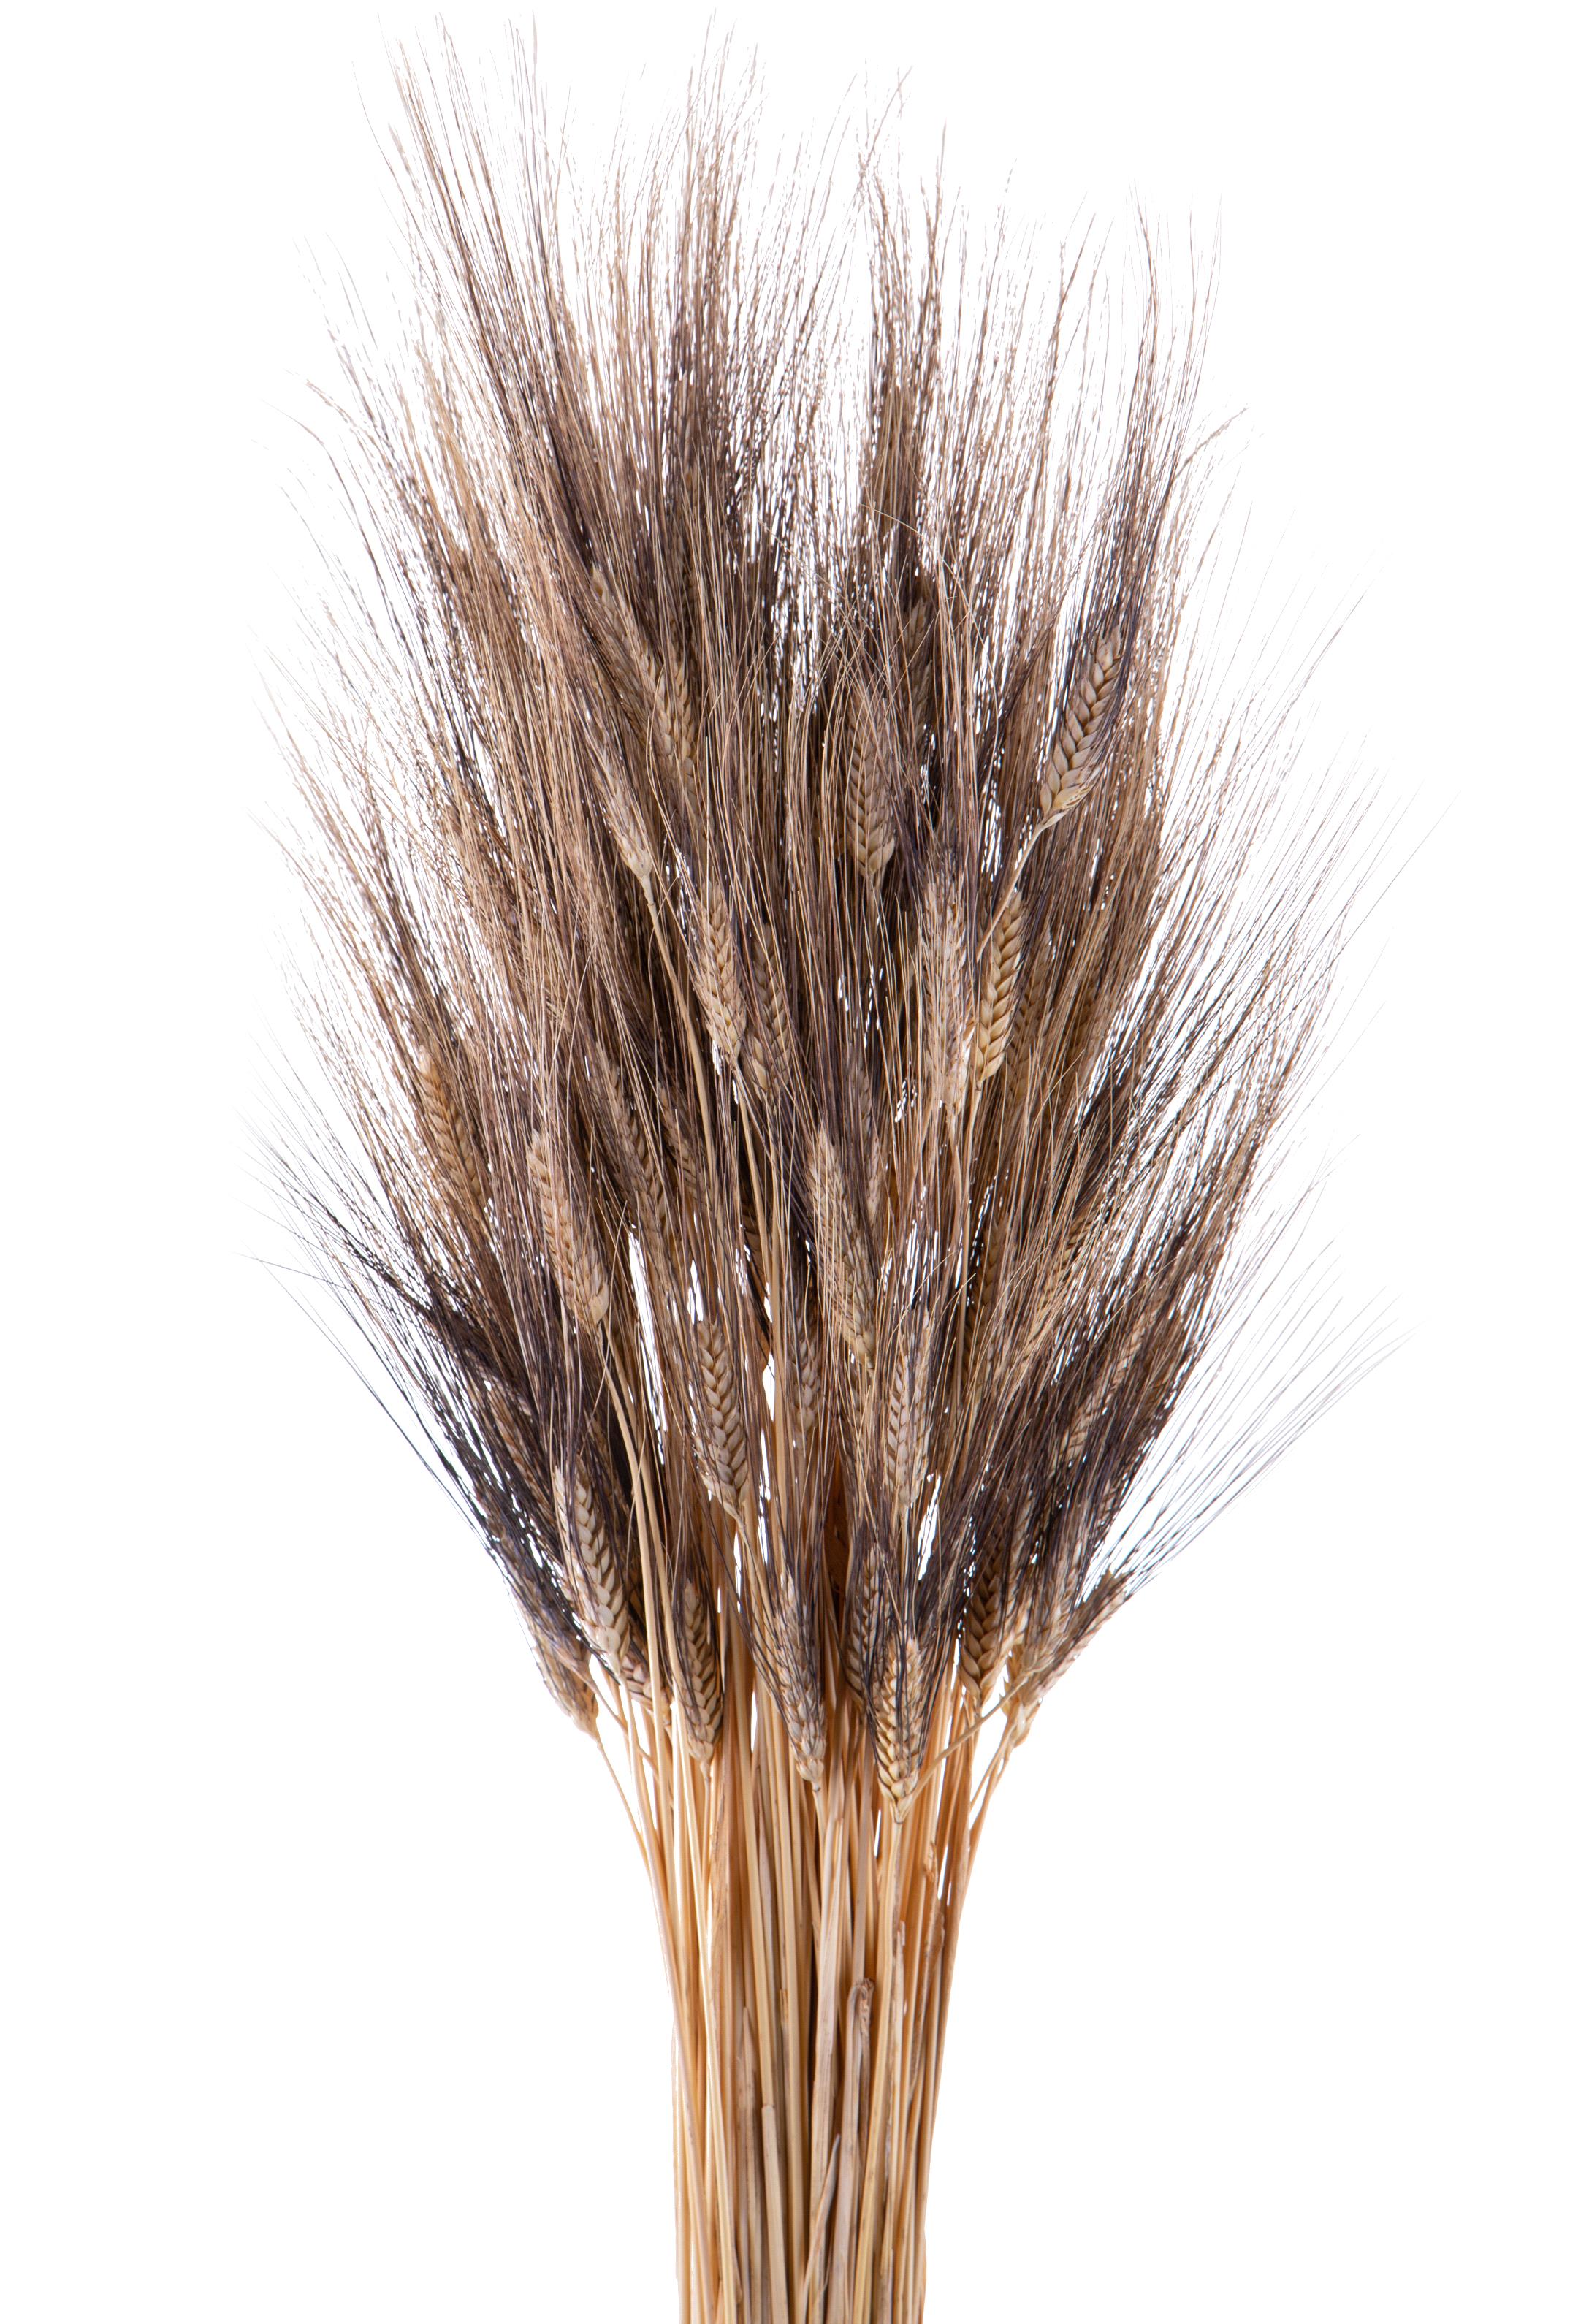 NATURAL PRODUCTS DRIED FLOWERS AND ERBS, NATURAL GRASS, GRANO TRITICUM 50 PZ 90 CM BF/NERO SAC